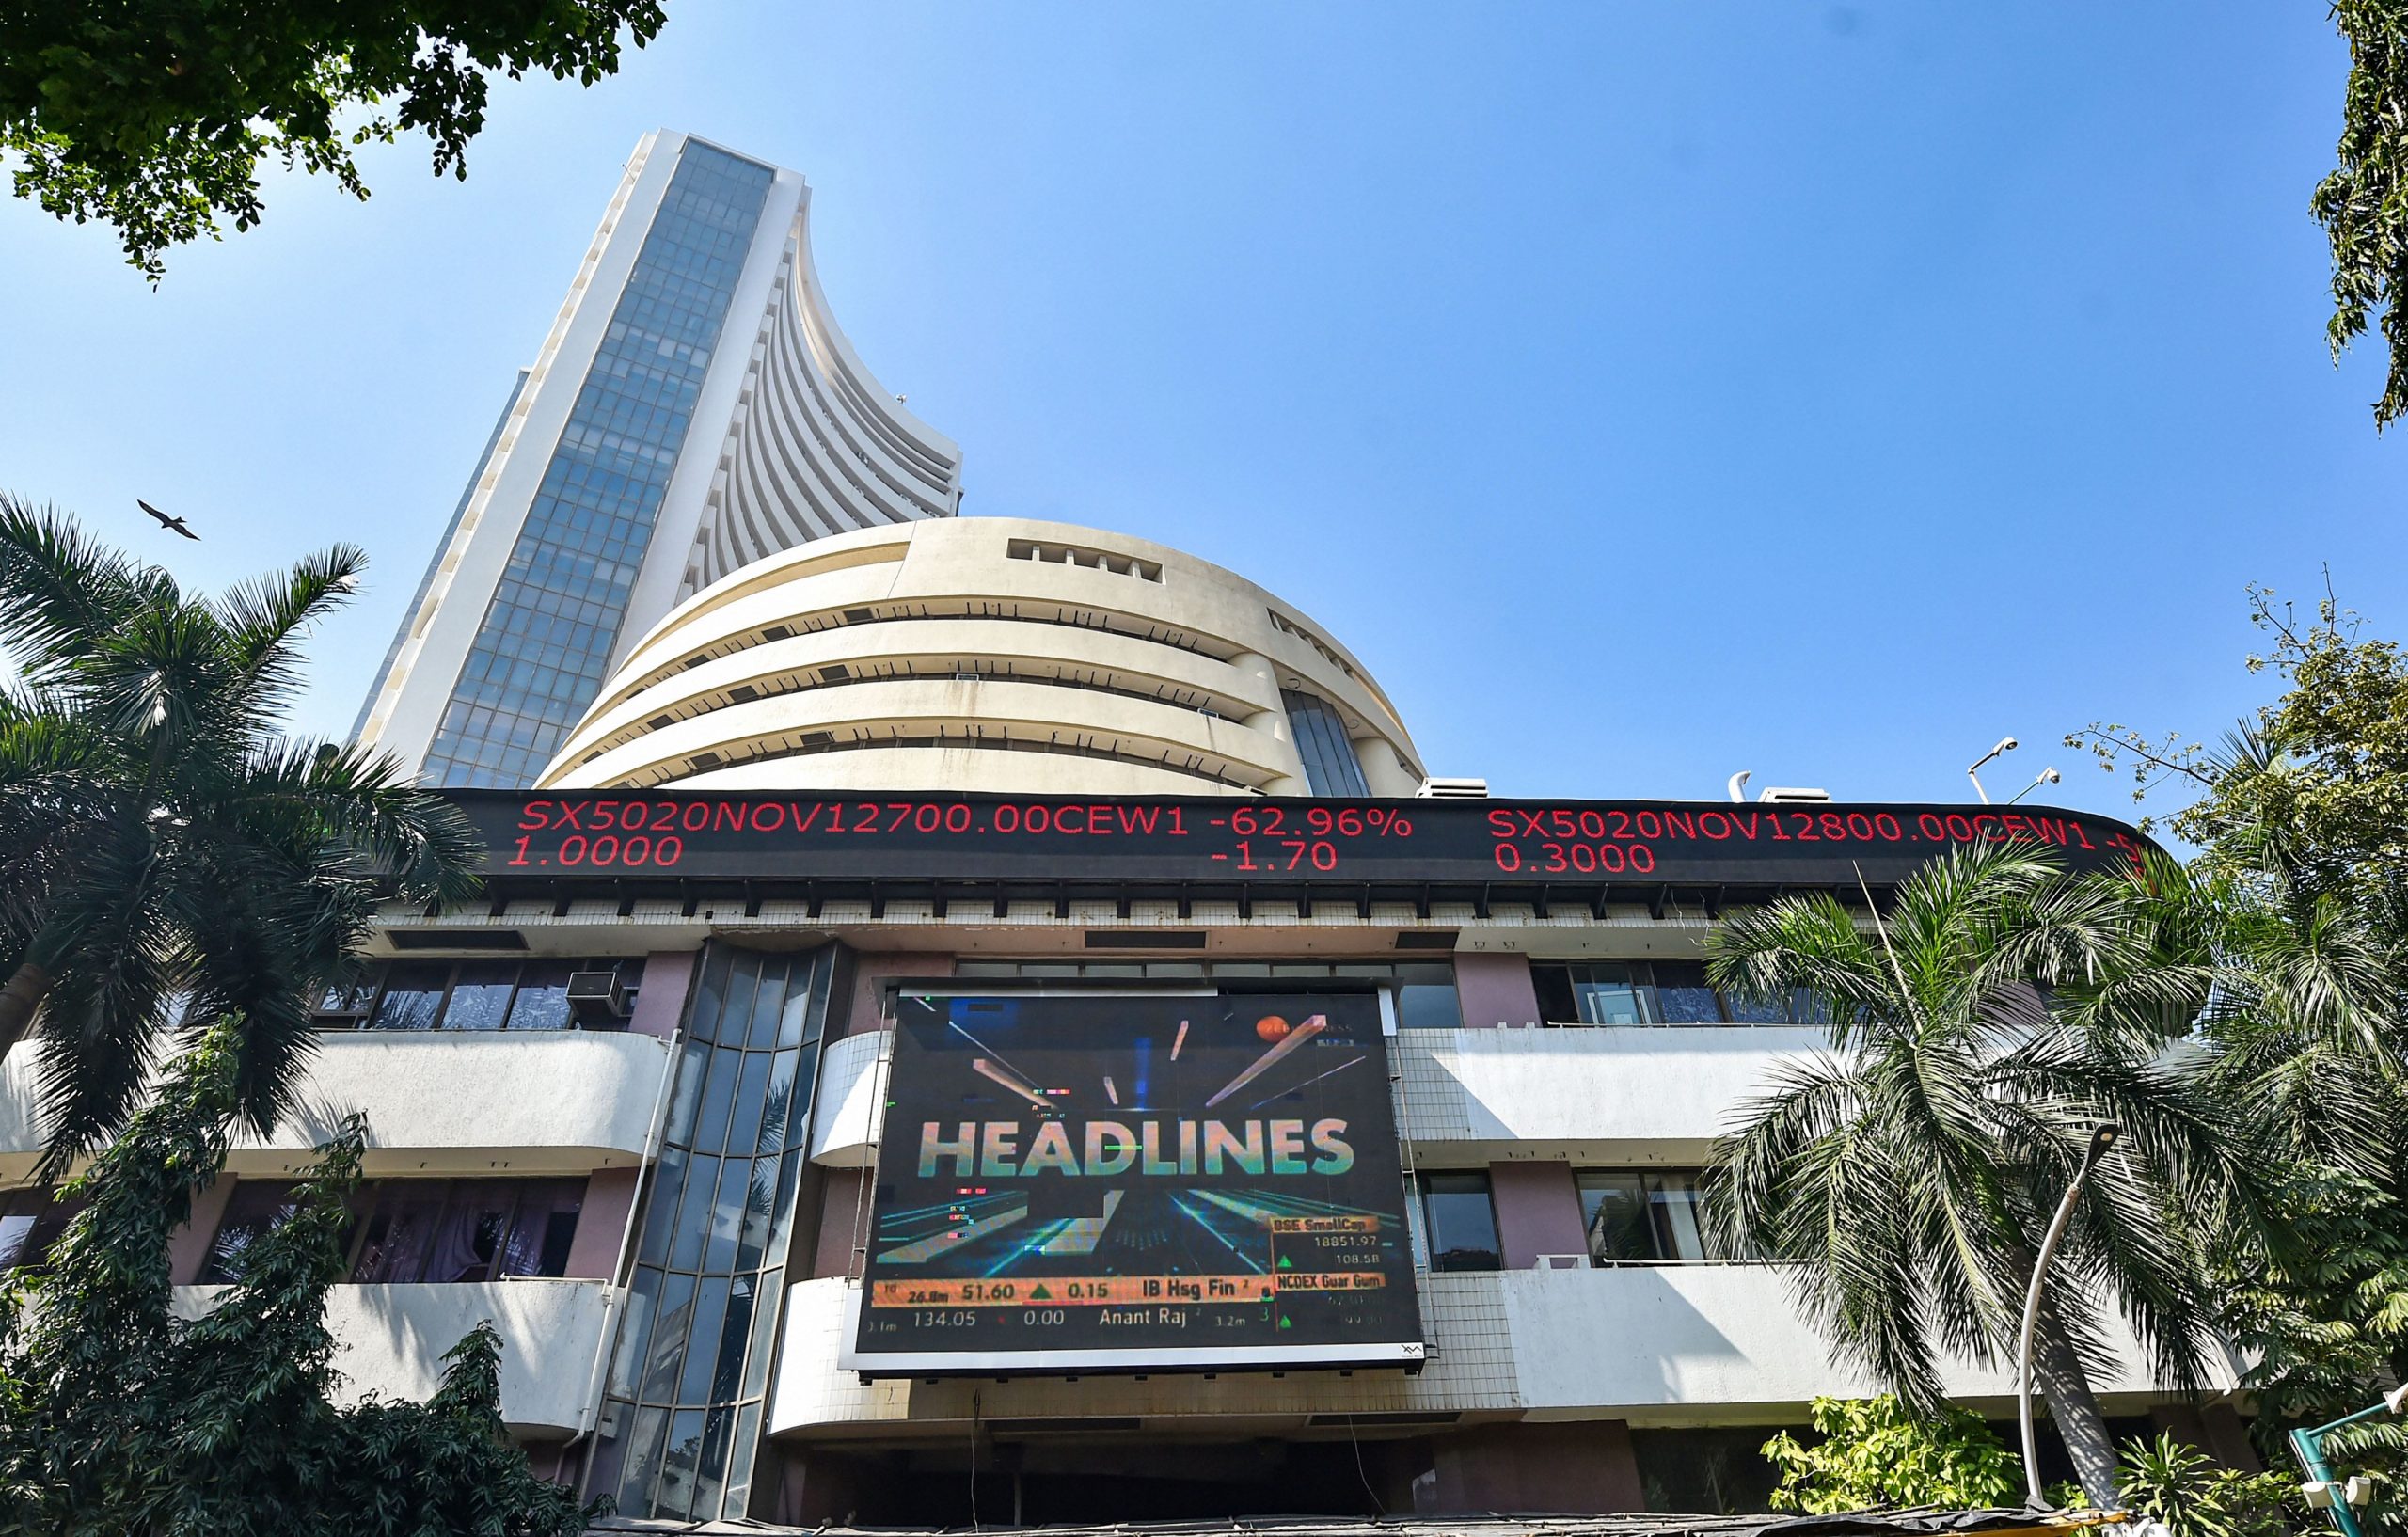 Trending Stocks: Ruchi Soya, L&T, Nalco, Hero MotoCorp and others in news today